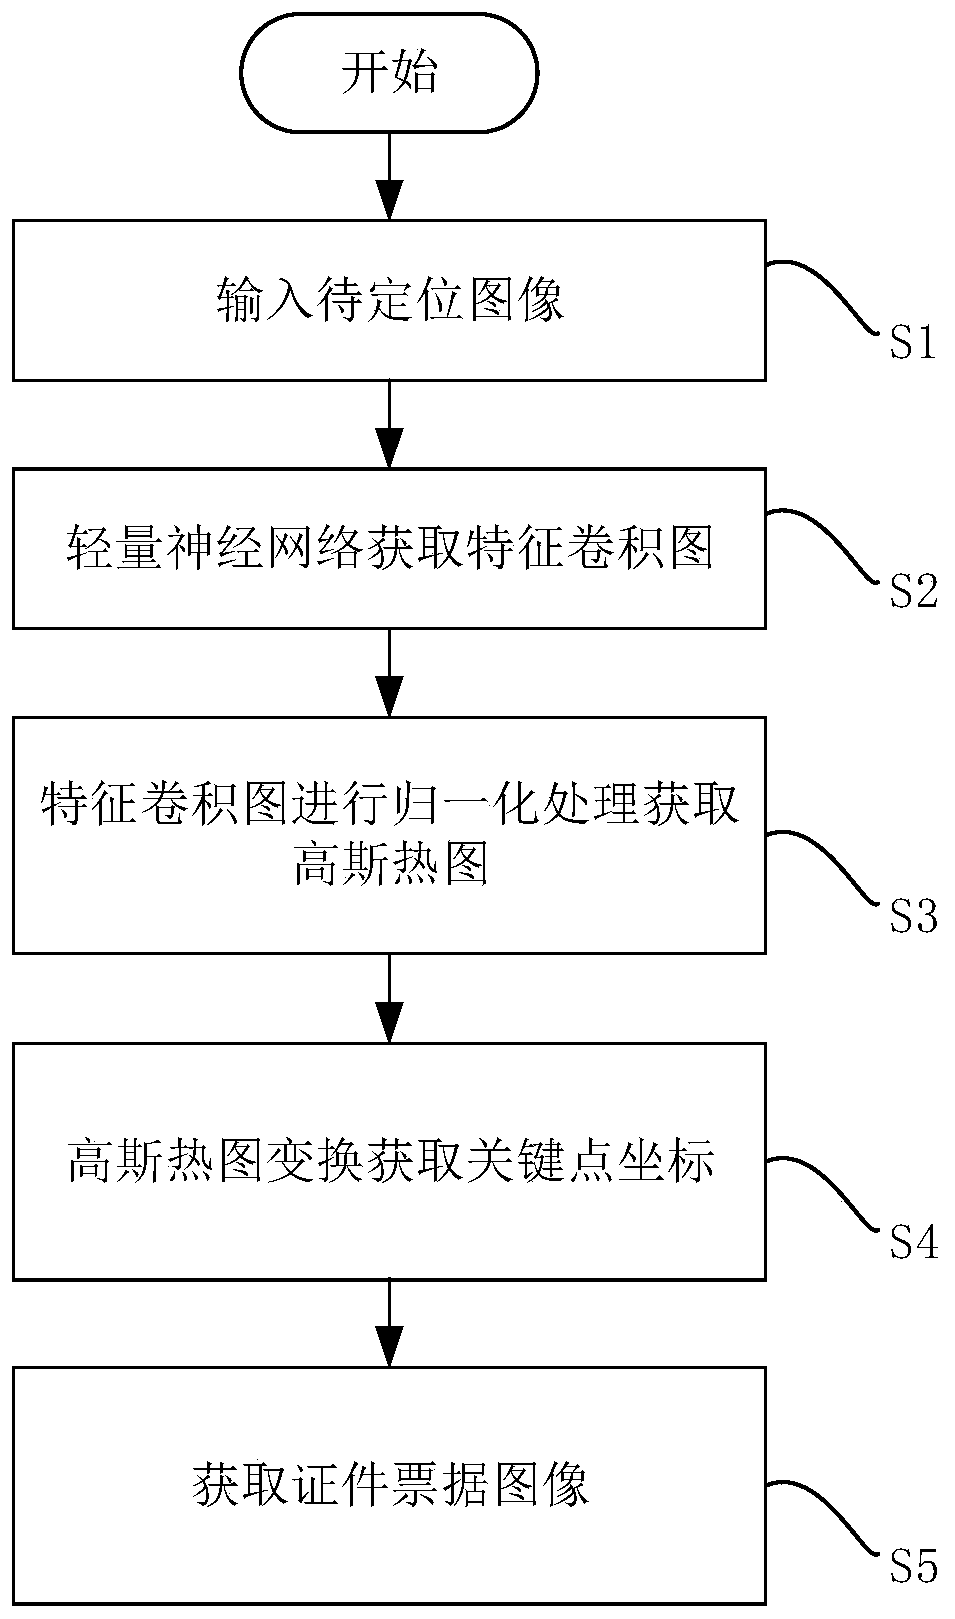 Certificate bill positioning detection method based on numerical prediction regression model